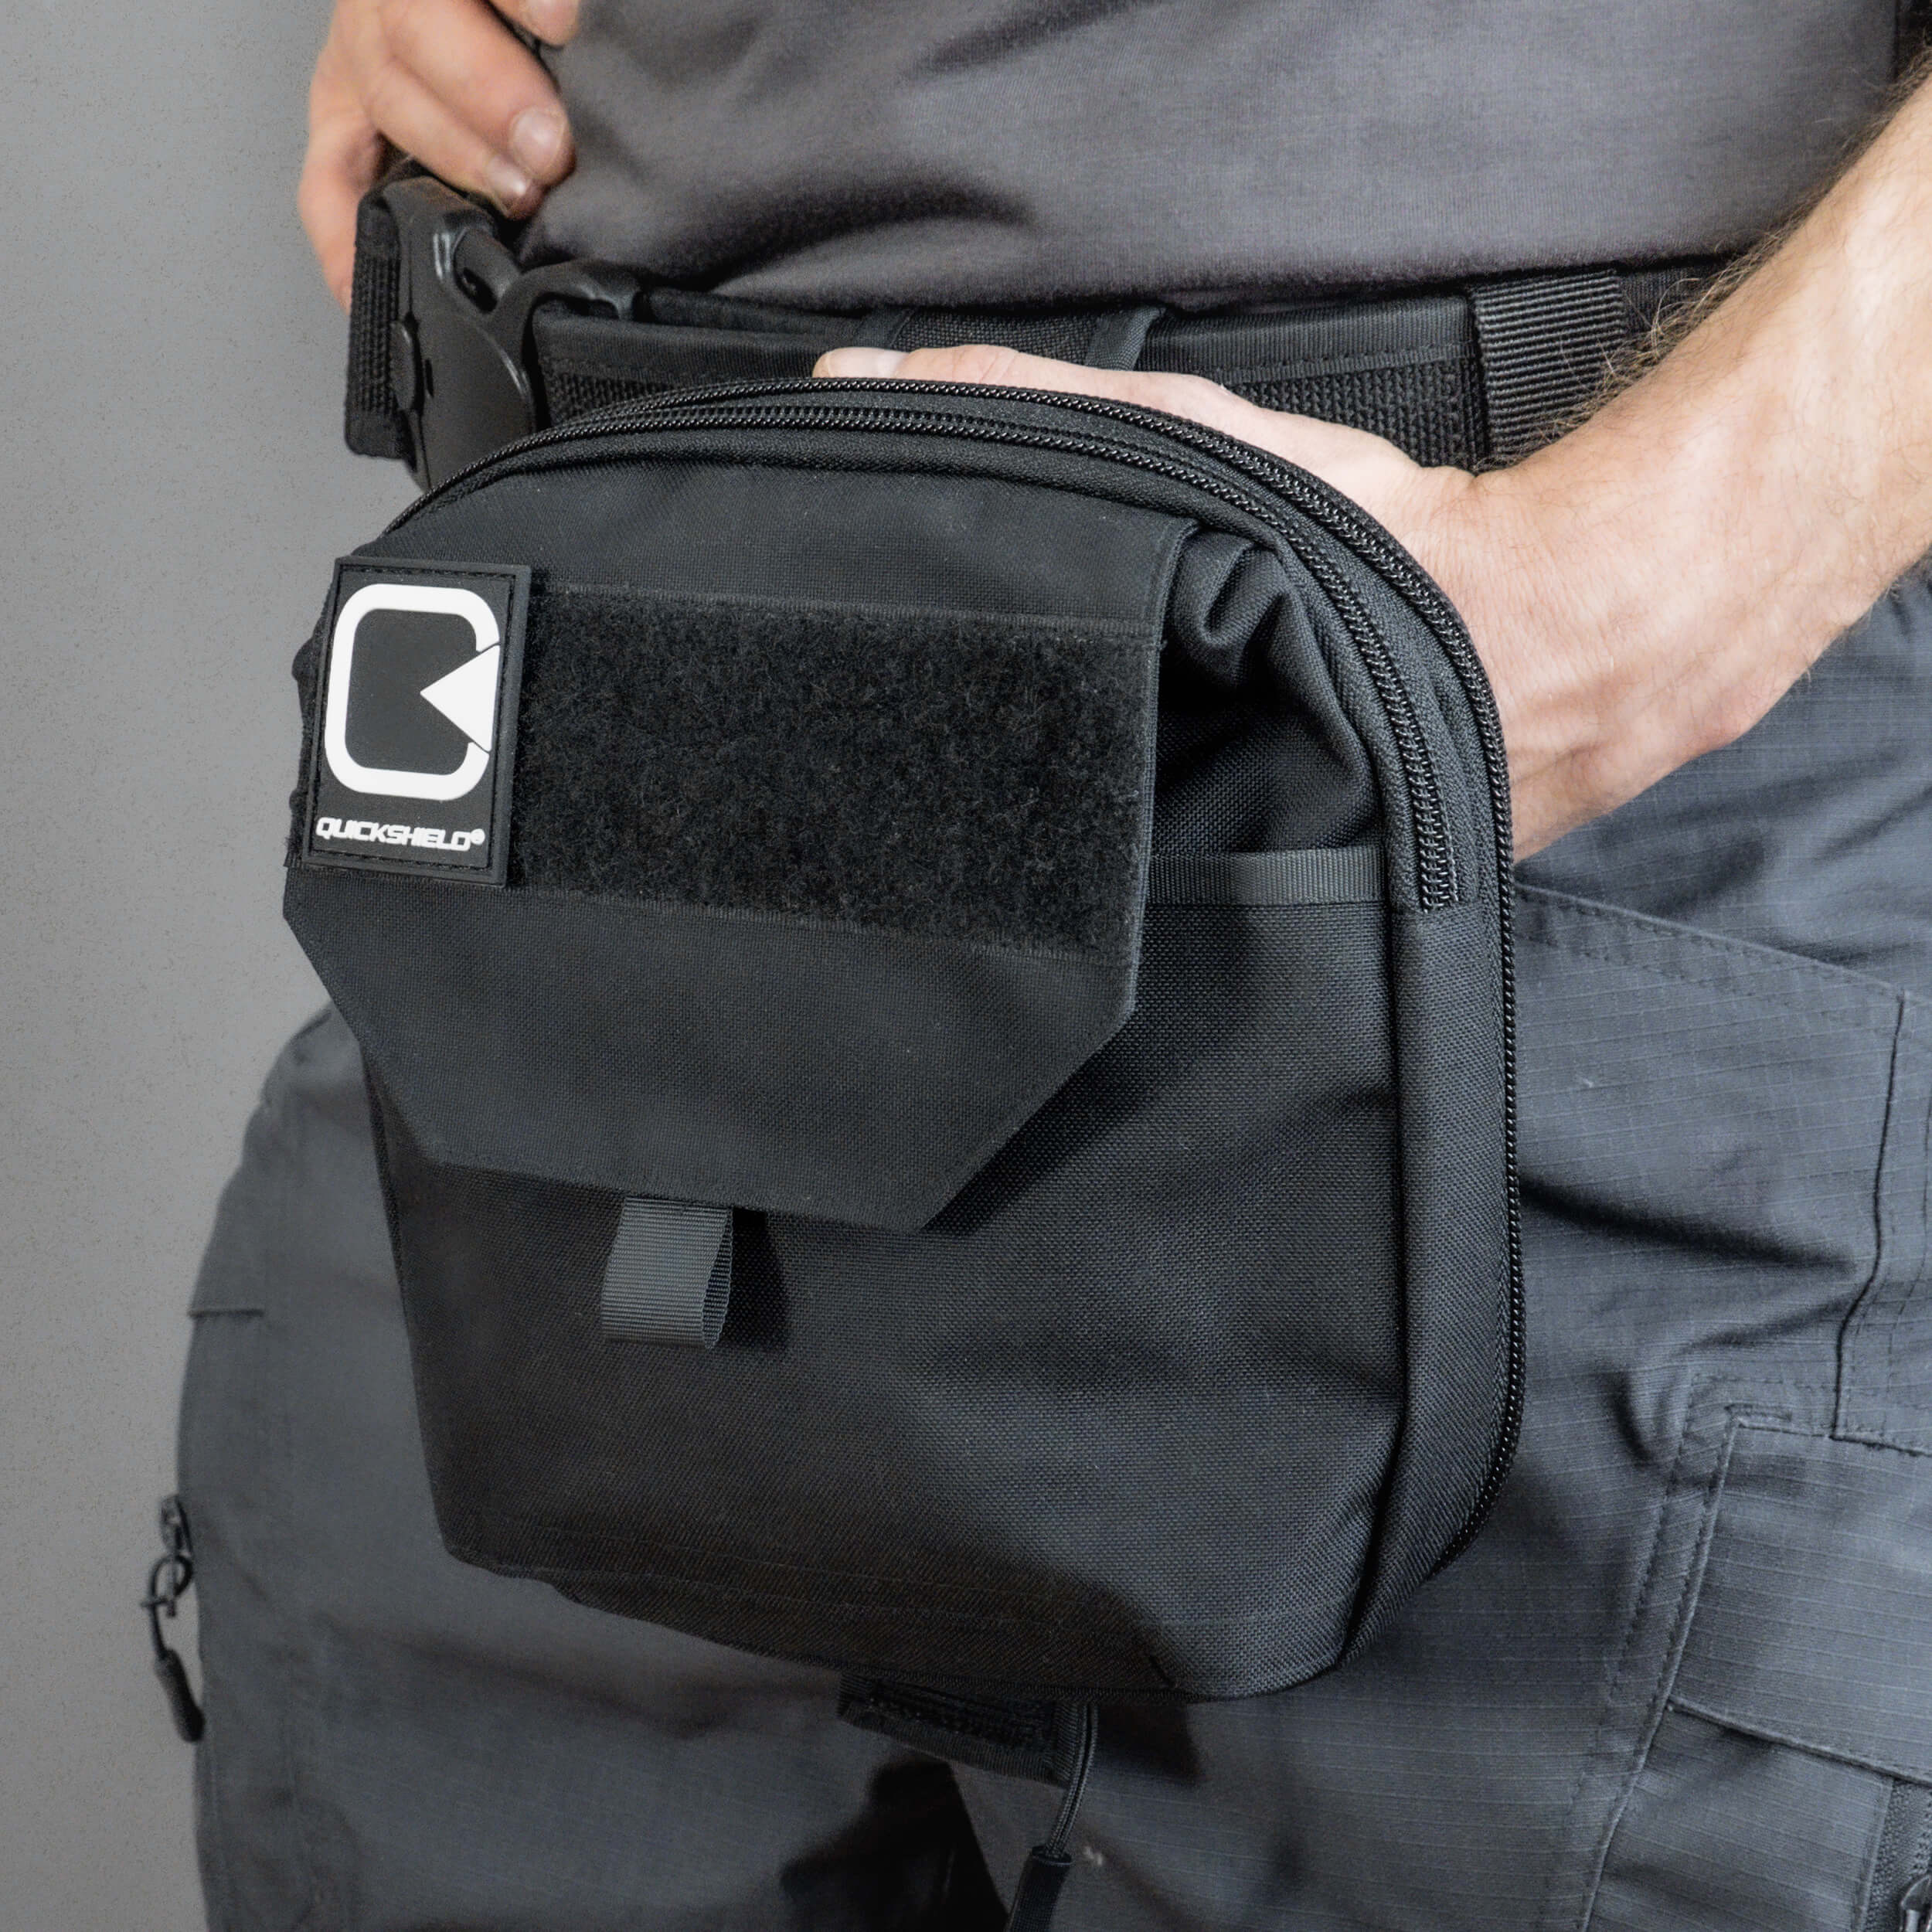 Quickshield - Tactical (tactical protective shield)